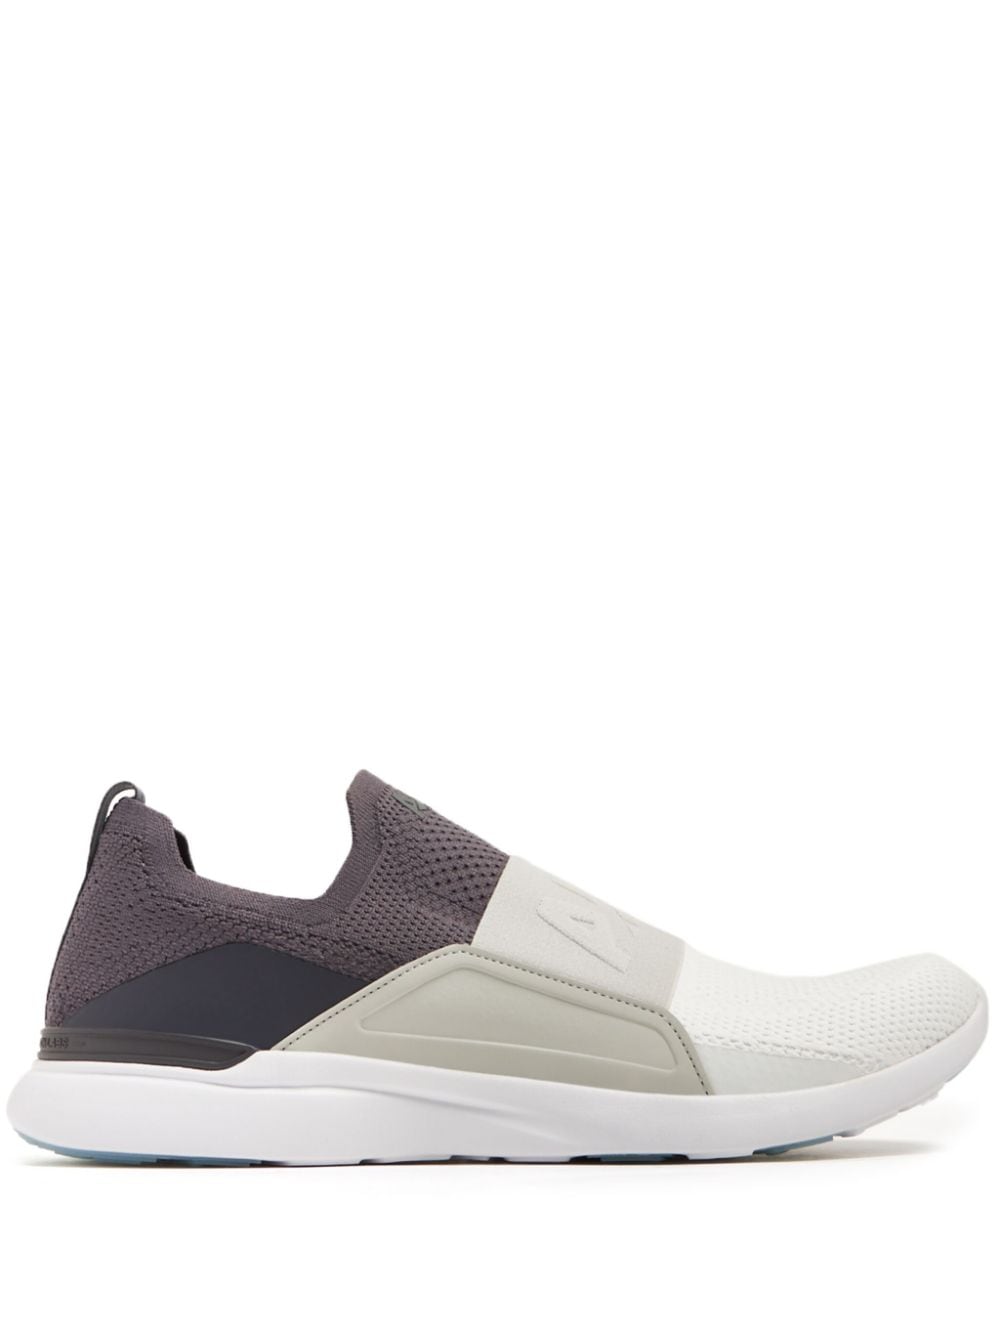 APL: ATHLETIC PROPULSION LABS TechLoom Bliss slip-on sneakers - White von APL: ATHLETIC PROPULSION LABS